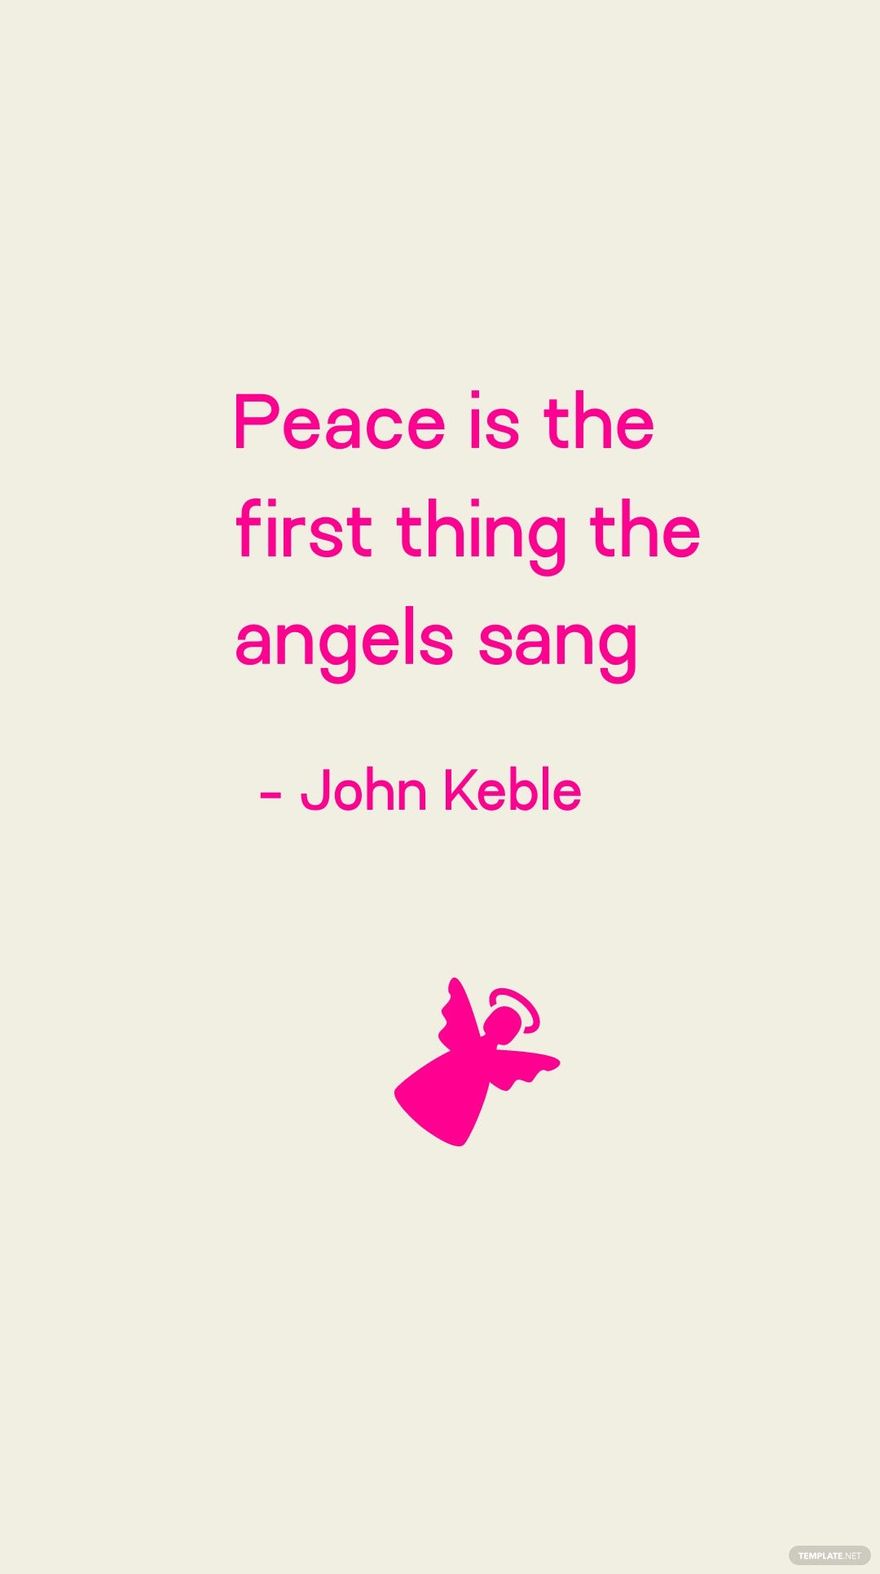 Free John Keble - Peace is the first thing the angels sang in JPG